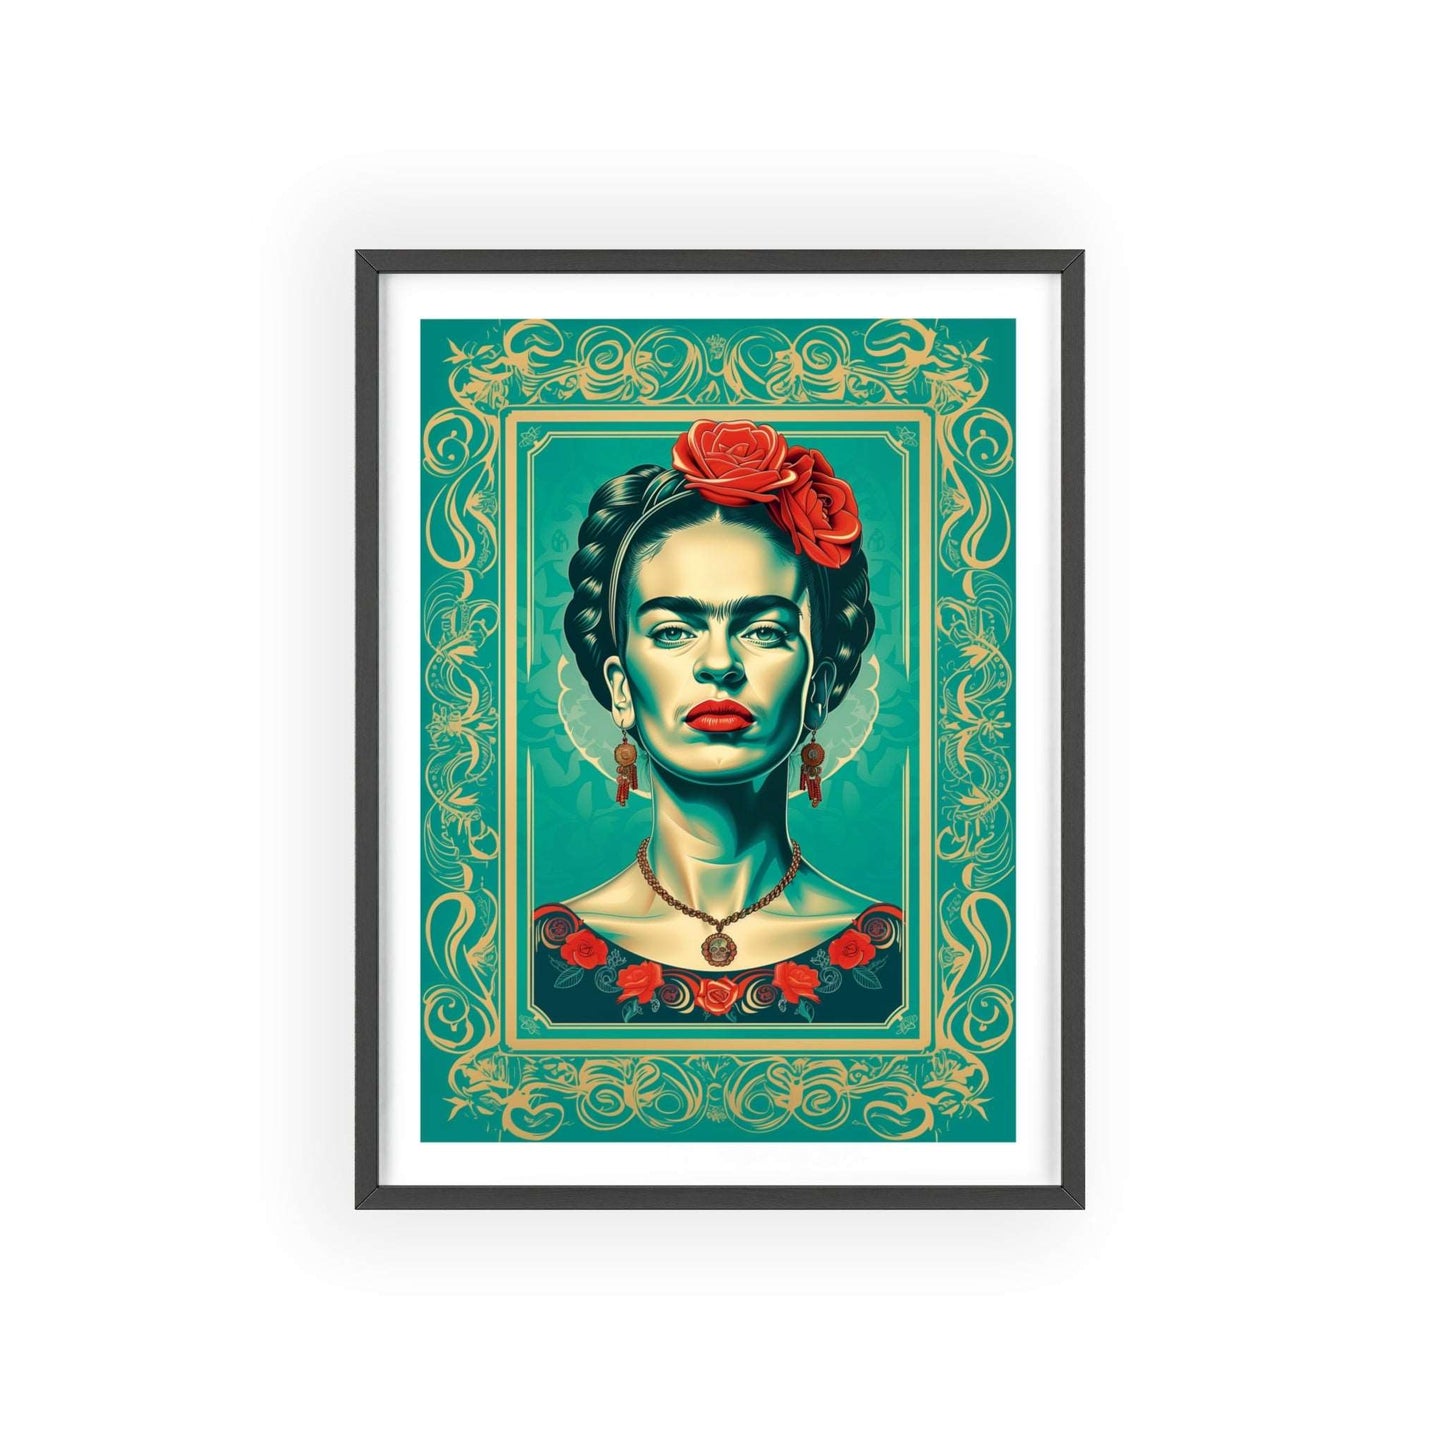 Framed portrait poster of Frida Kahlo in a modern vector design. Her features are rendered in gold, with aquamarine accents. The background is aquamarine.